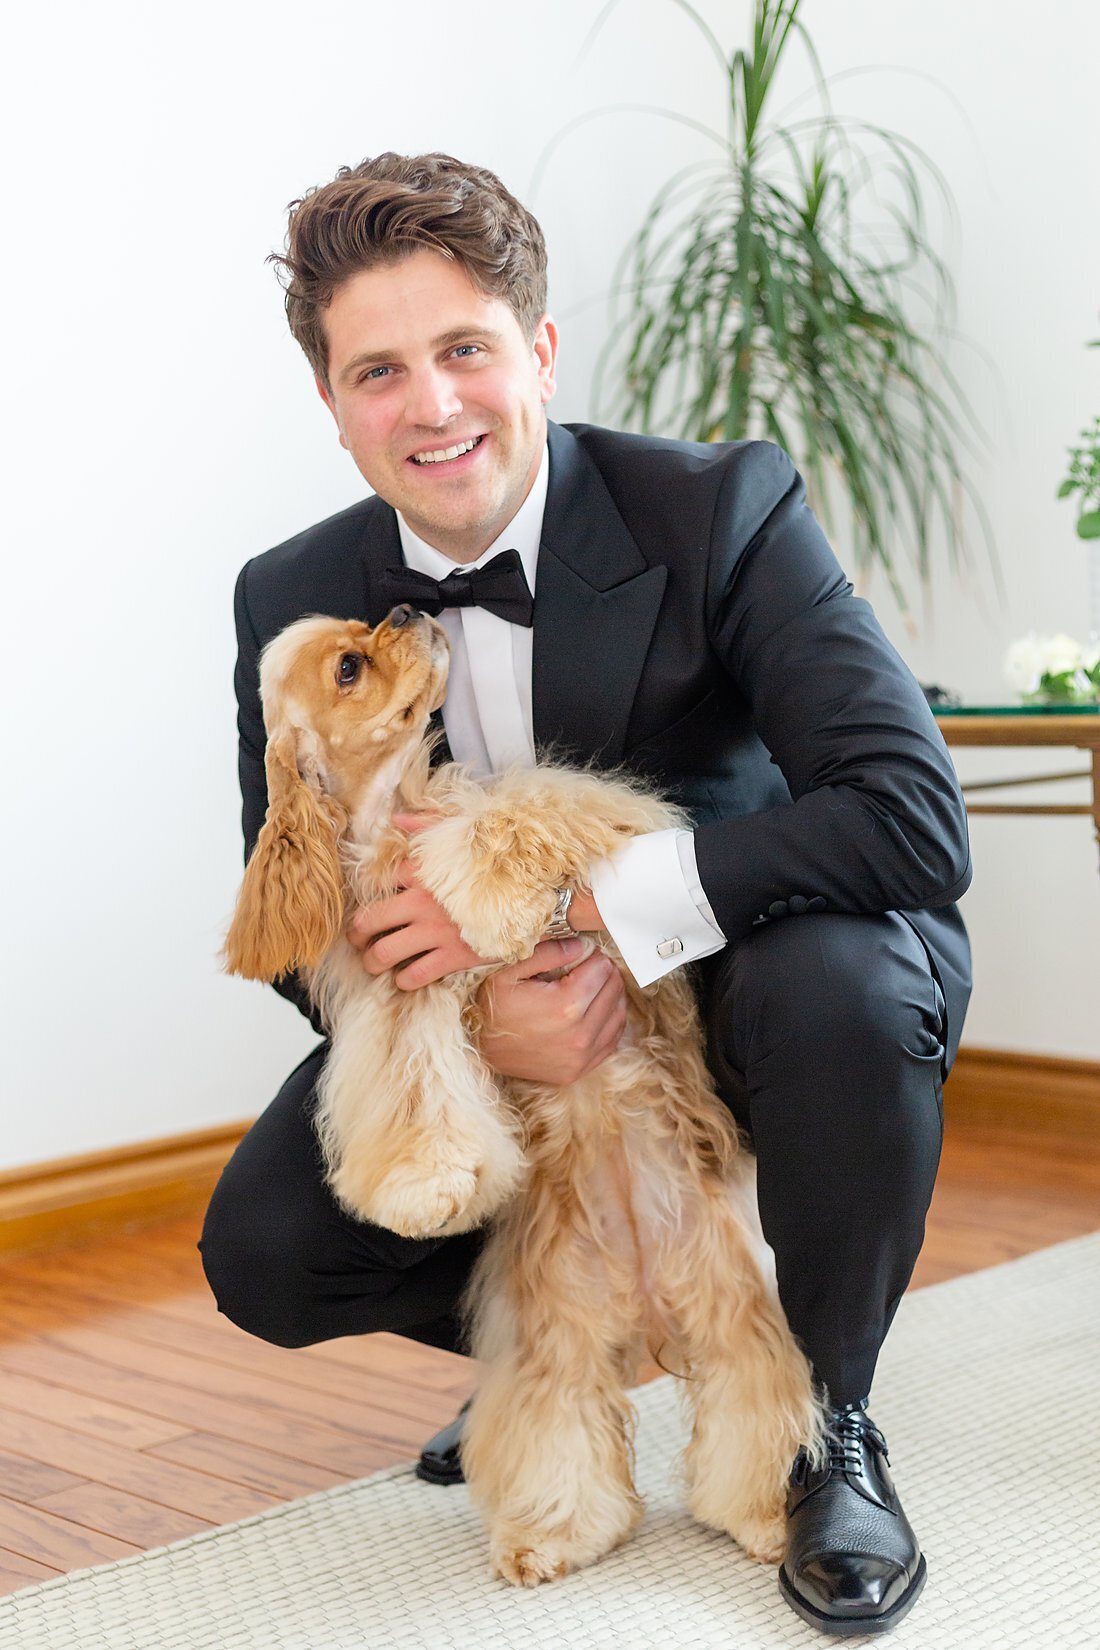 Handsome-groom-squats-down-to-hug-his-small-dog-on-his-wedding-day